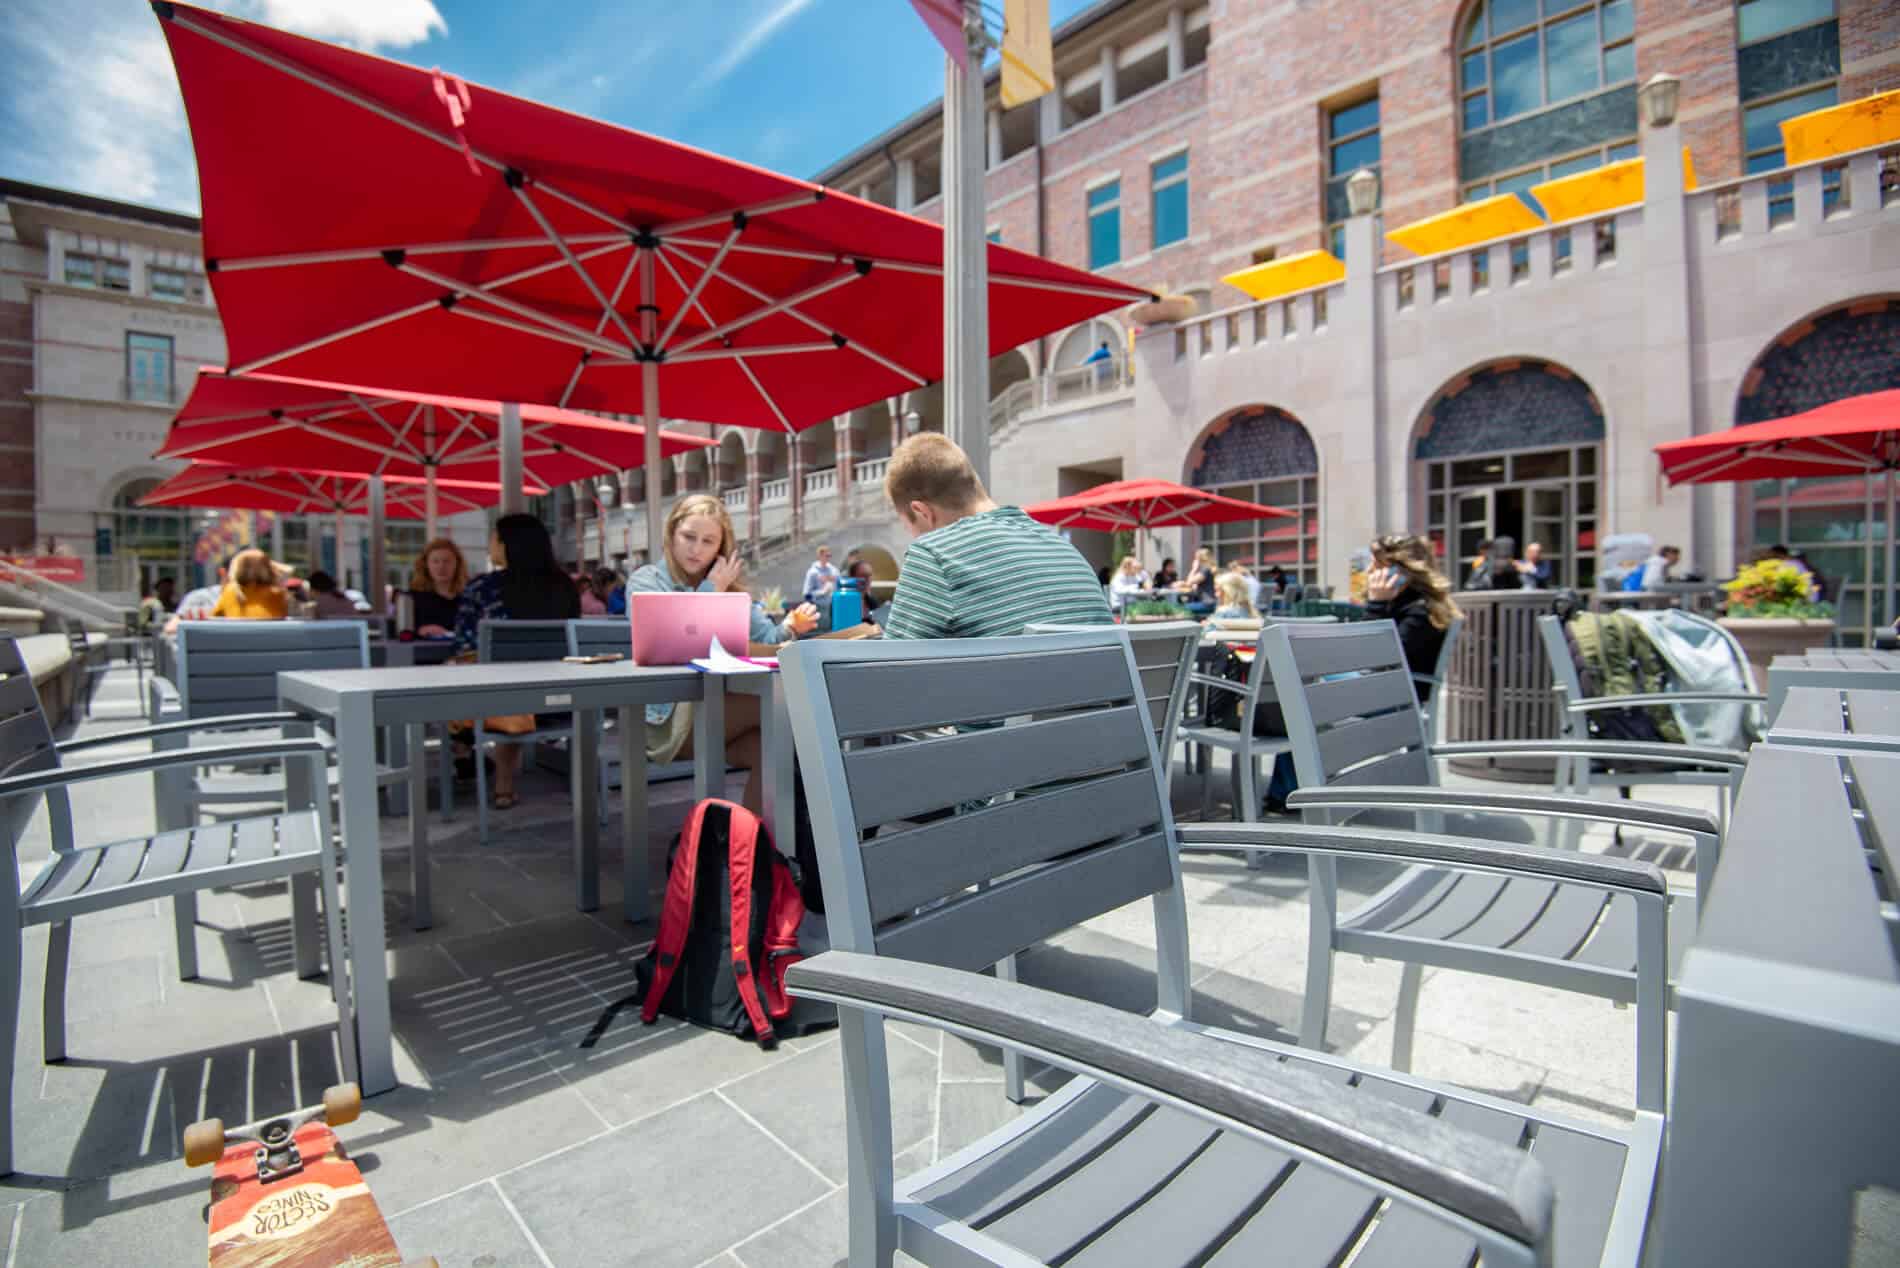 Premium outdoor furniture such as tables, umbrellas, and chairs designed for for high traffic in use by students